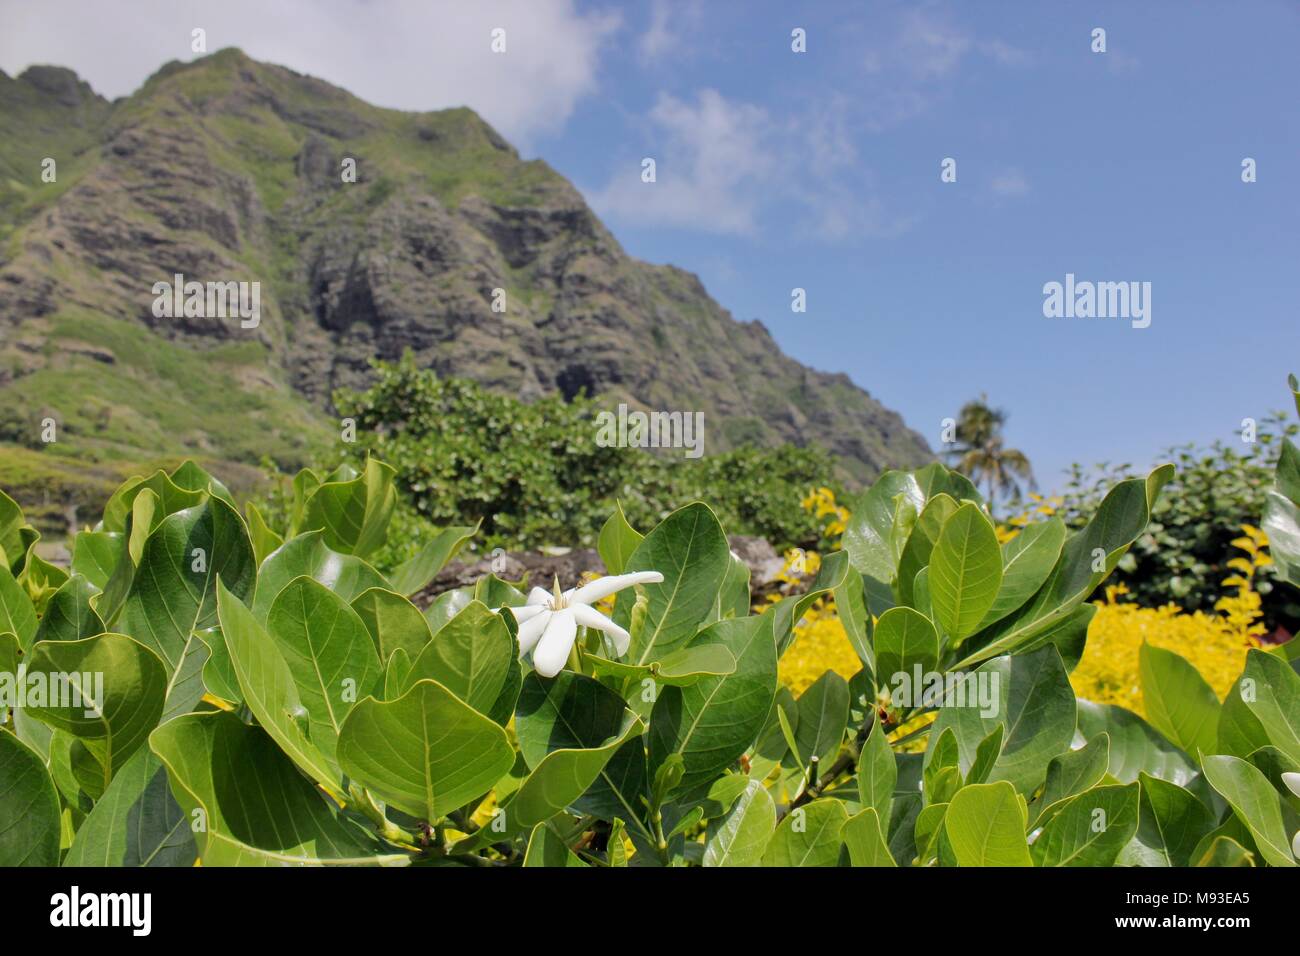 Mountains and flowers in the Ka'a'awa Valley on the Hawaiian Island of Oahu. Stock Photo